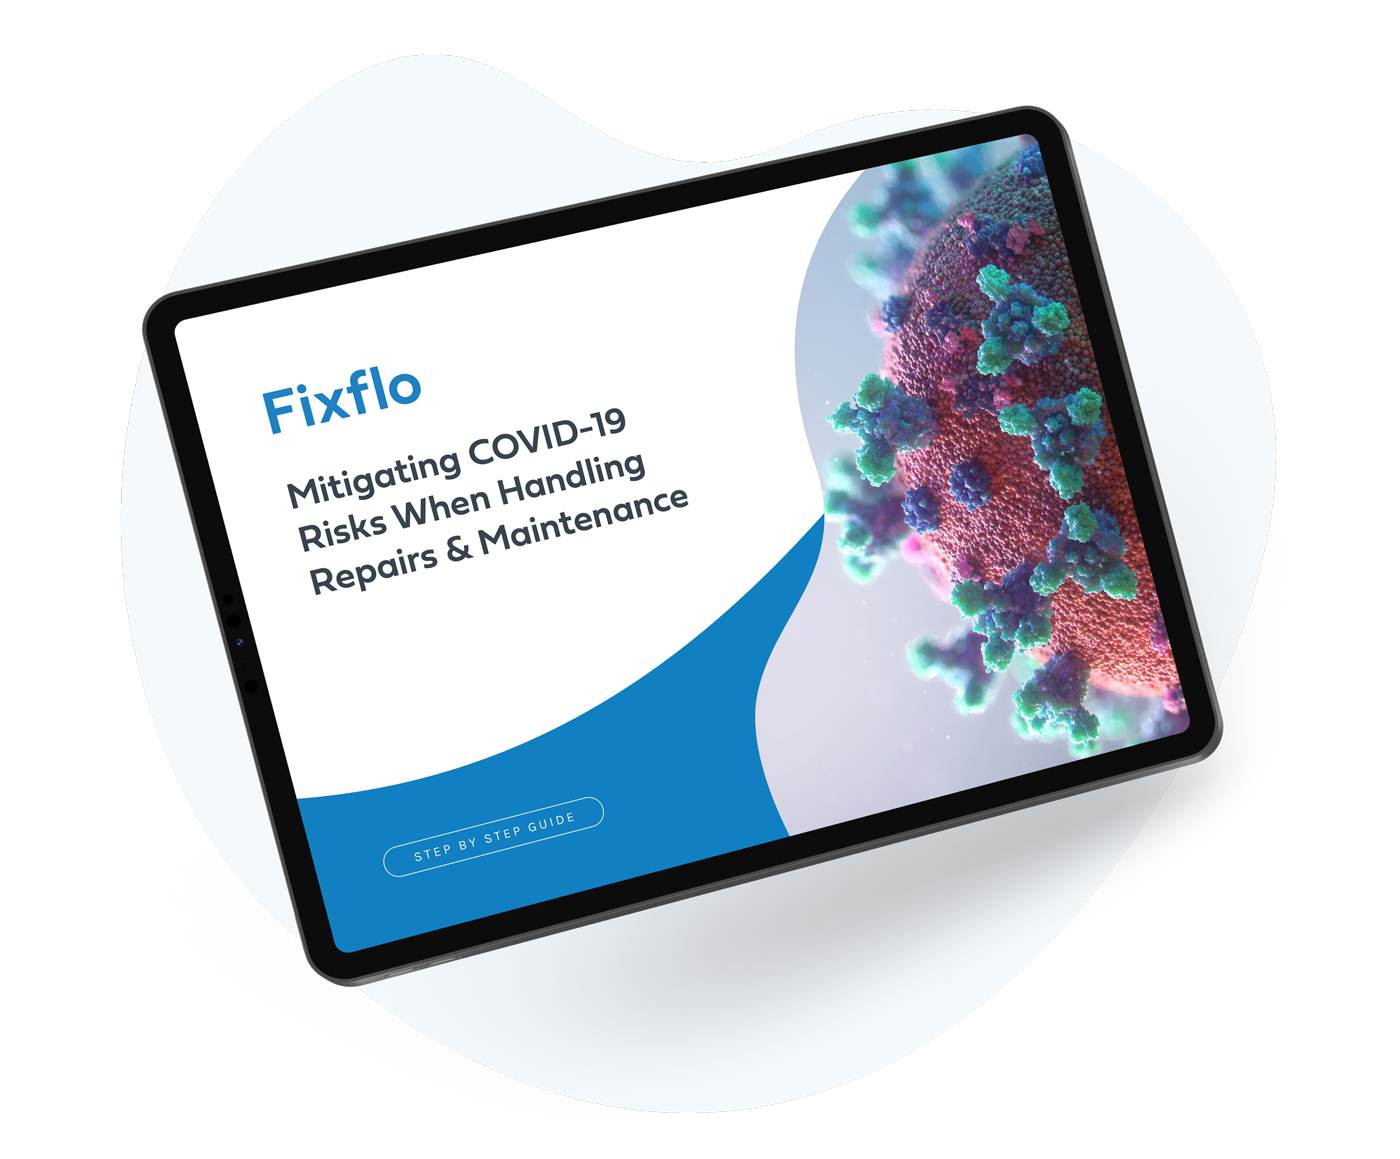 Fixflo Step-by-Step Guide - Mitigating Covid-19 Risks When Handling Repairs & Maintenance